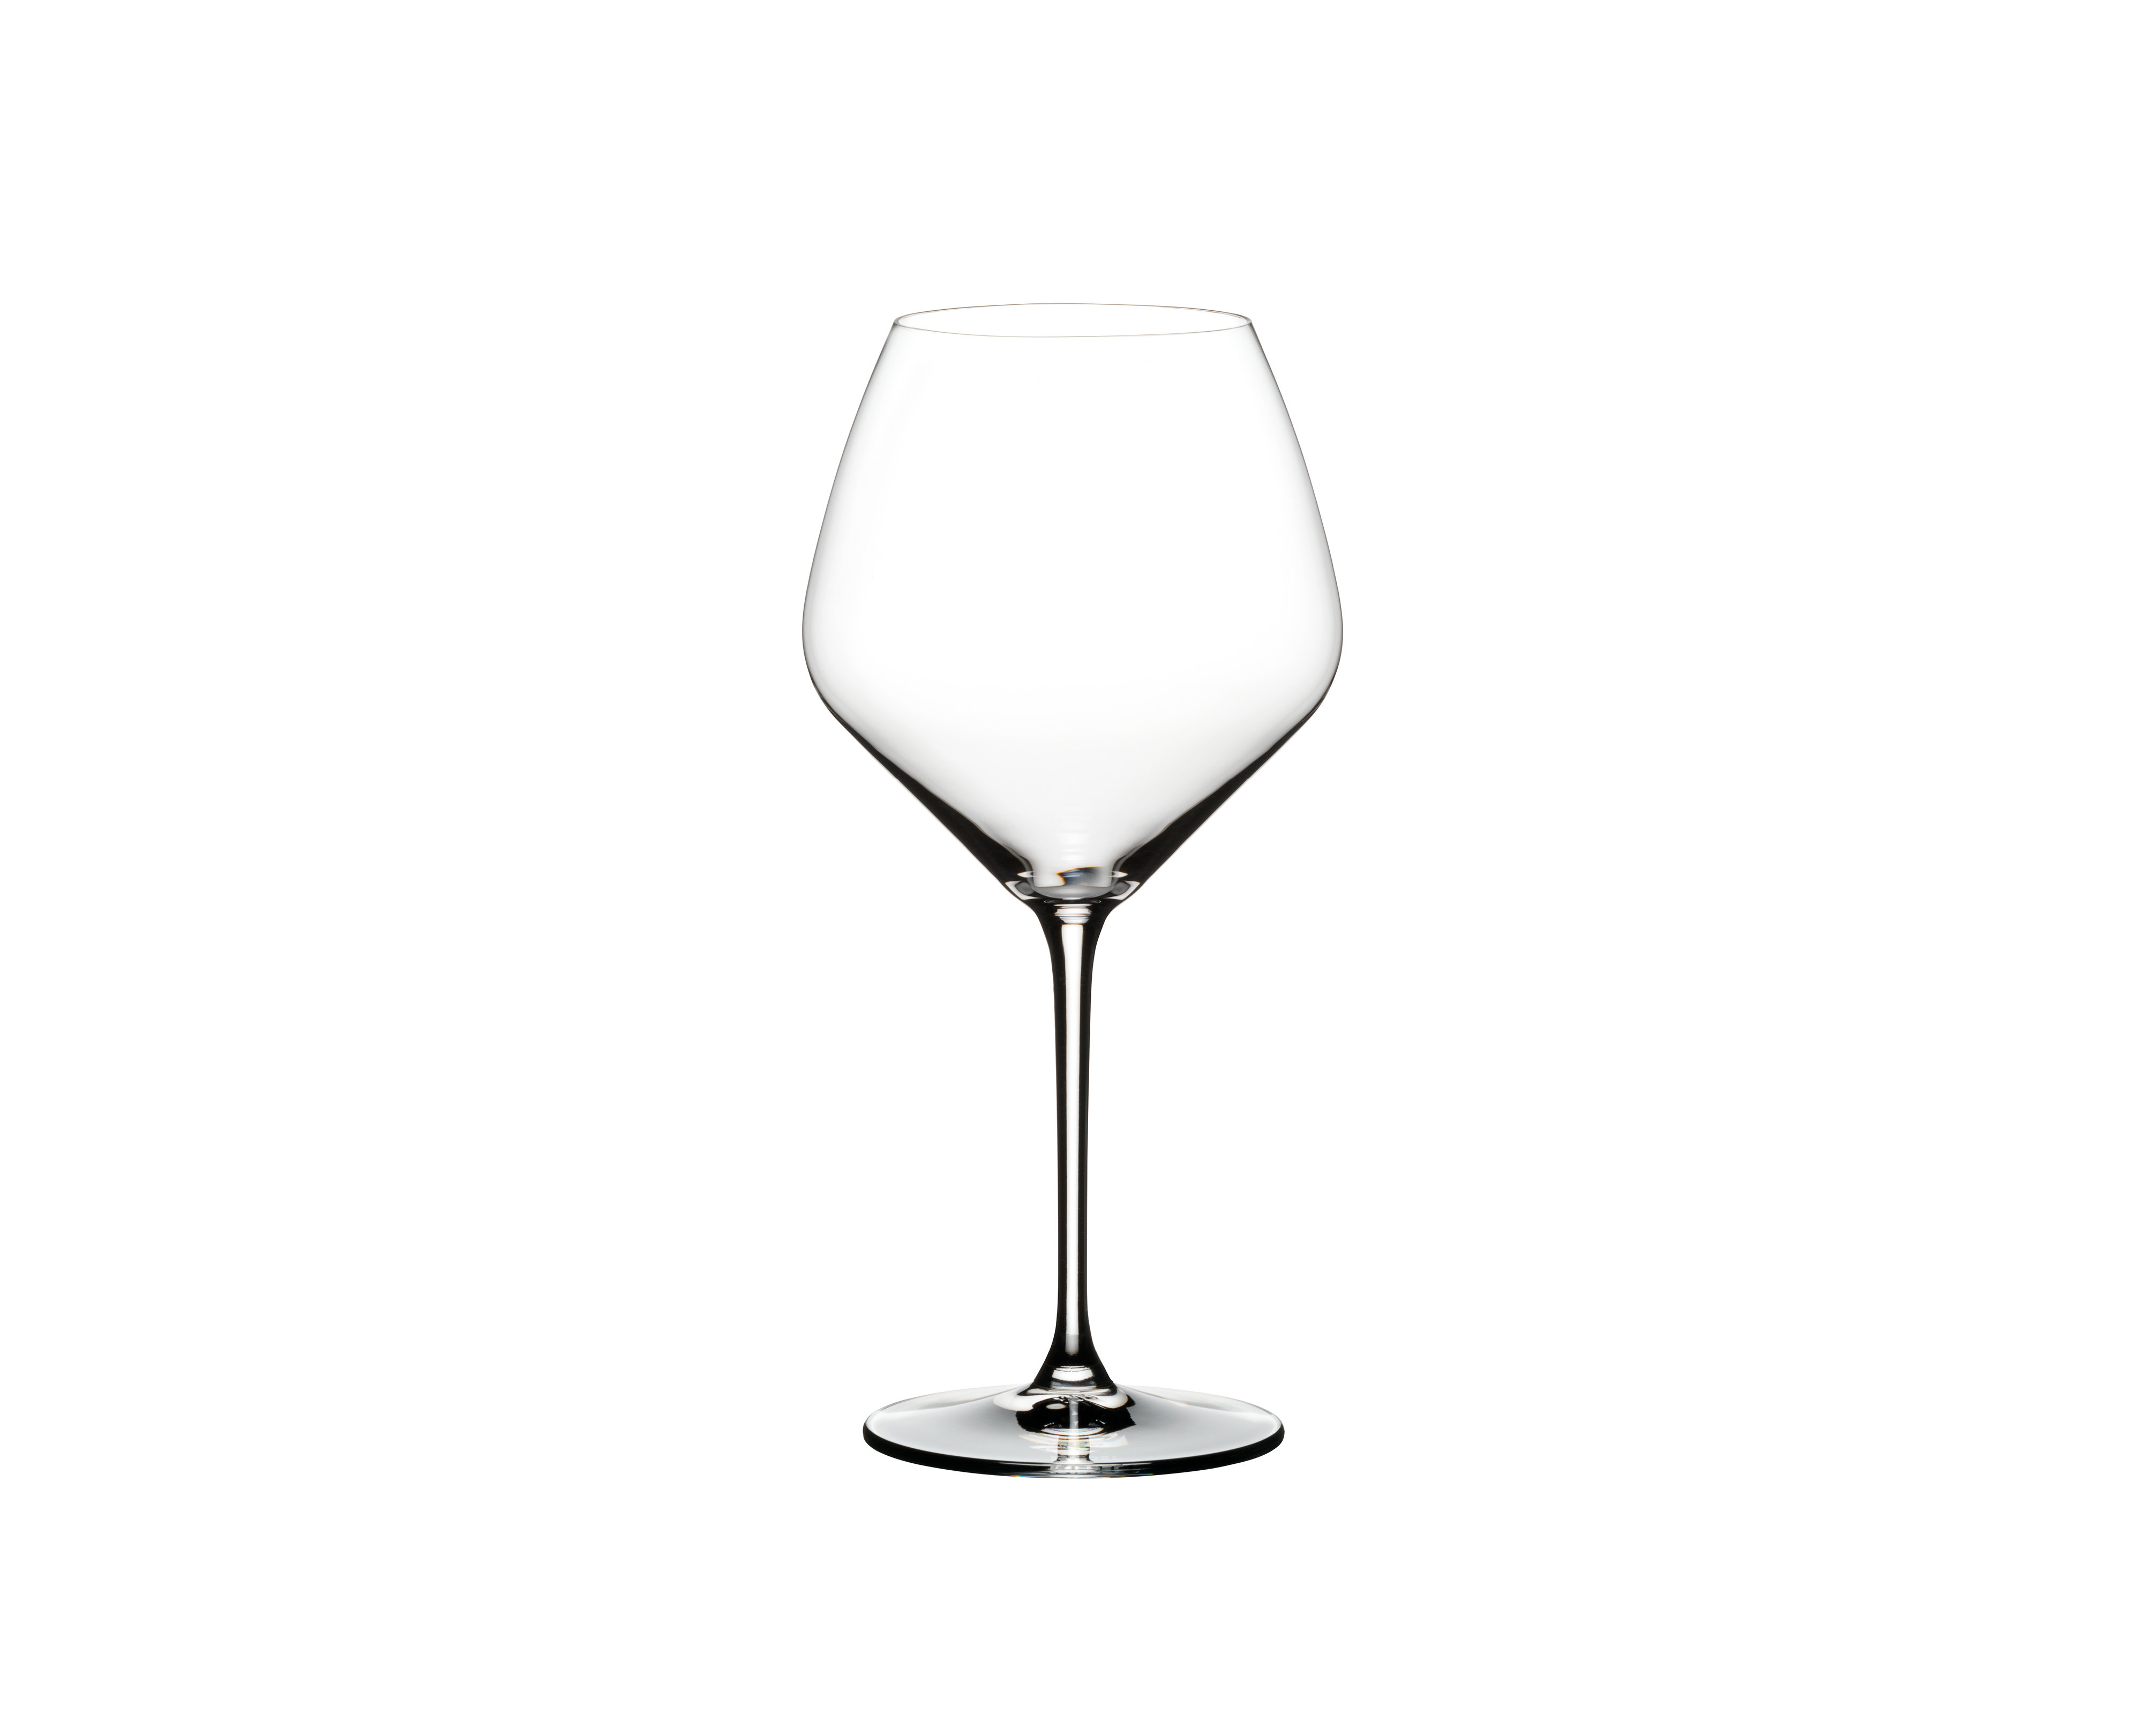 Riedel Extreme Pinot Noir Wine Glass Set of 4